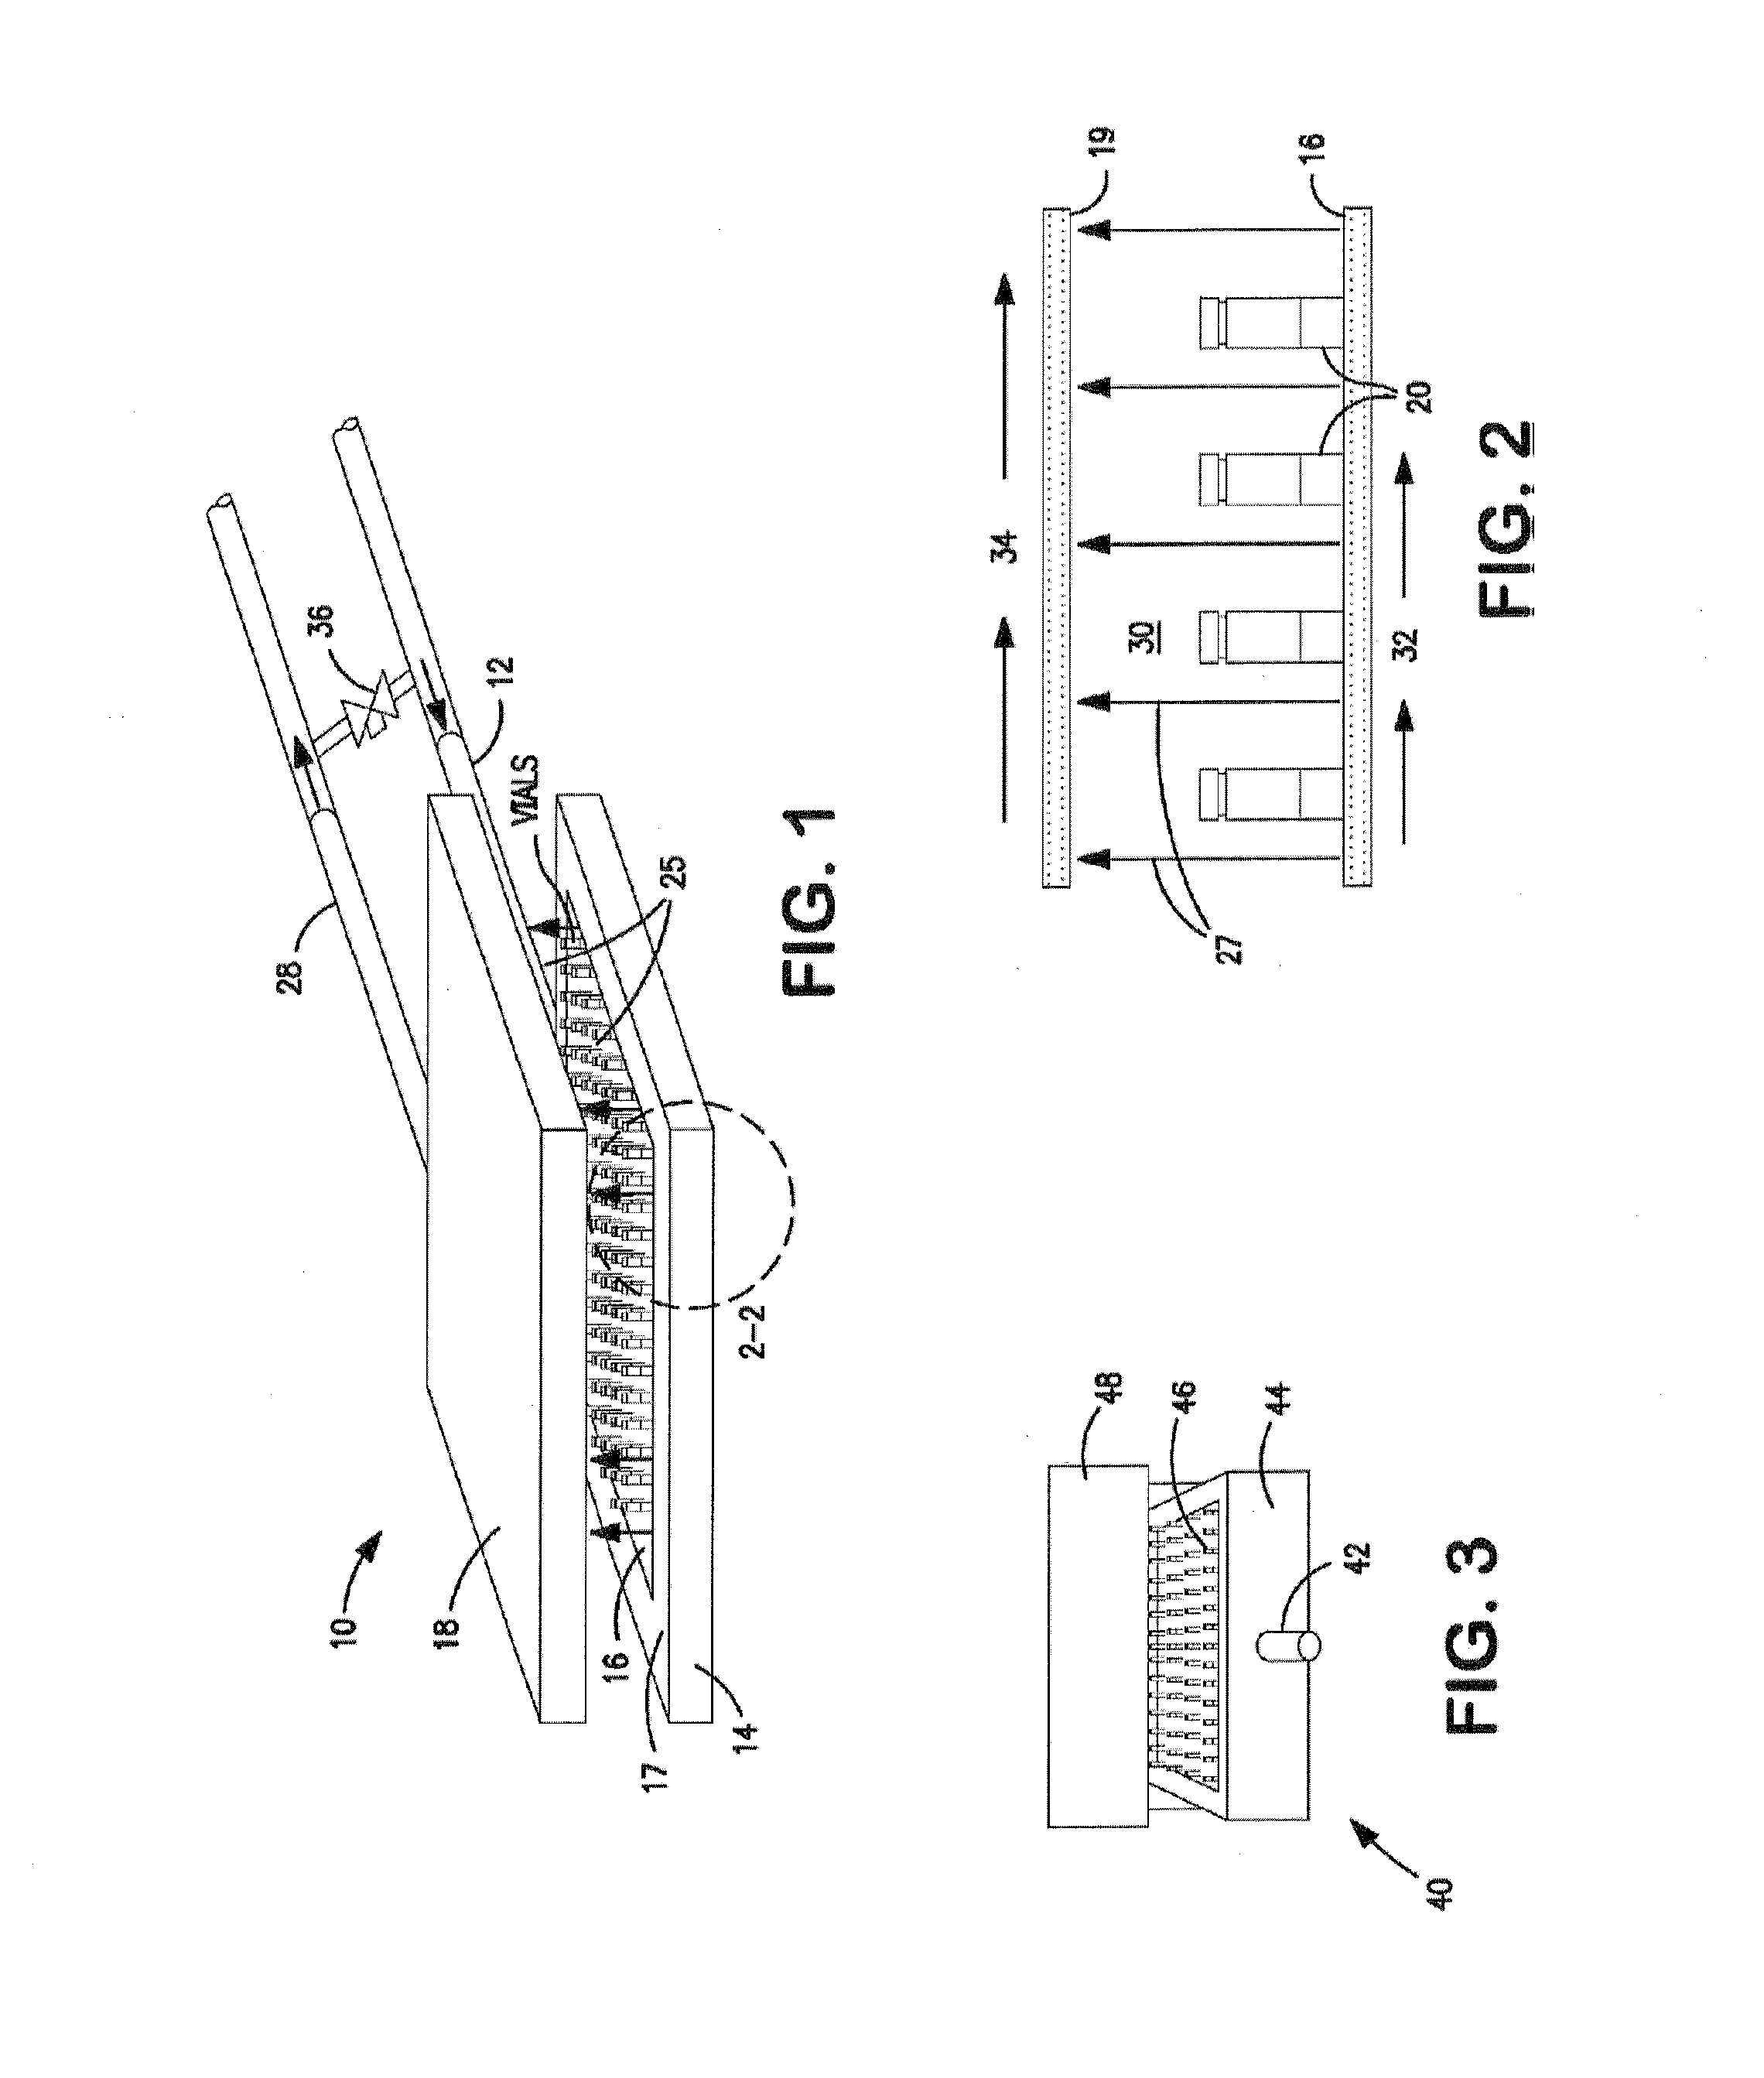 A method and system for cryopreservation to achieve uniform viability and biological activity